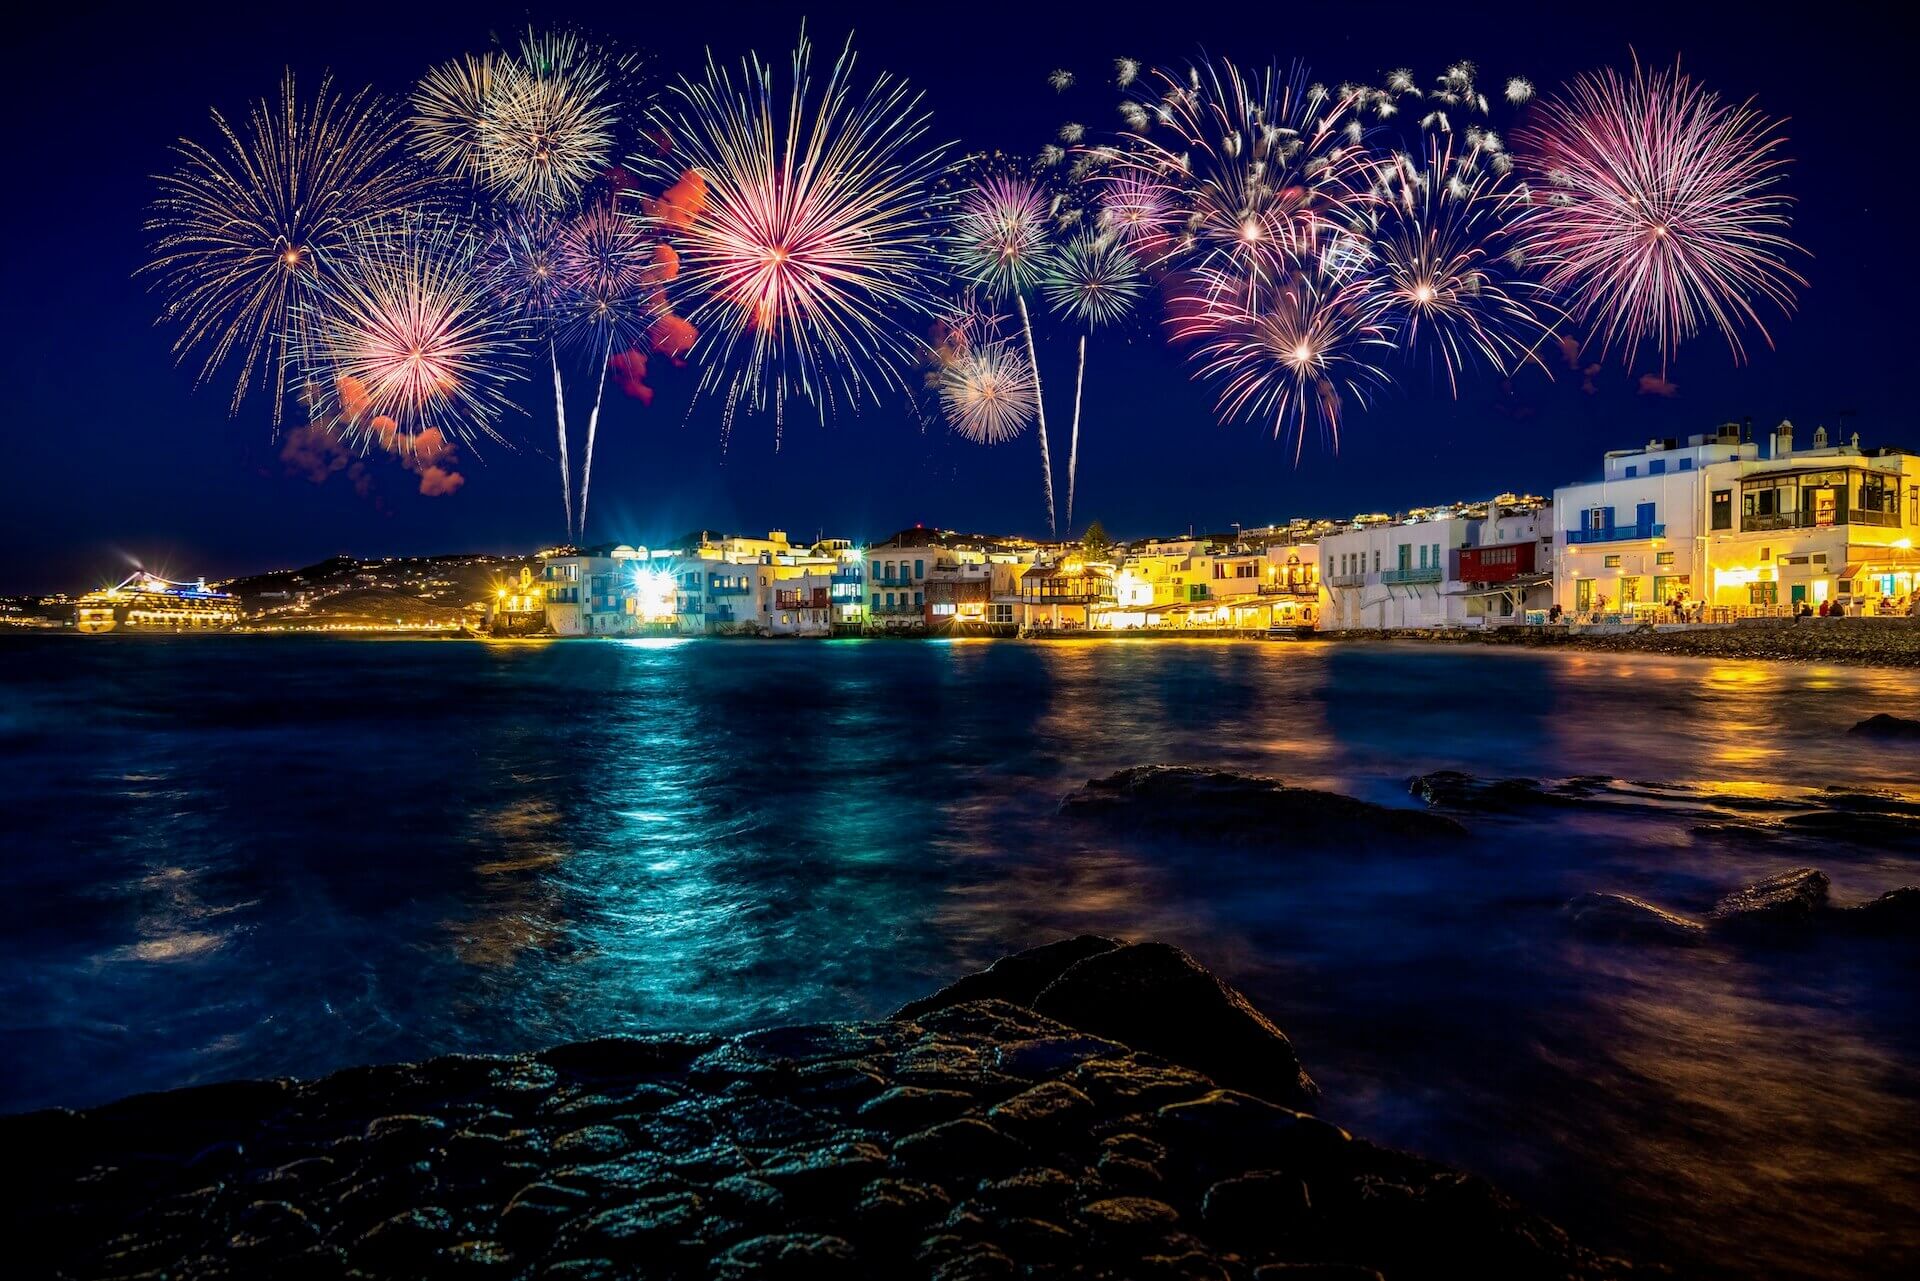 Fireworks above Mykonos town in the evening